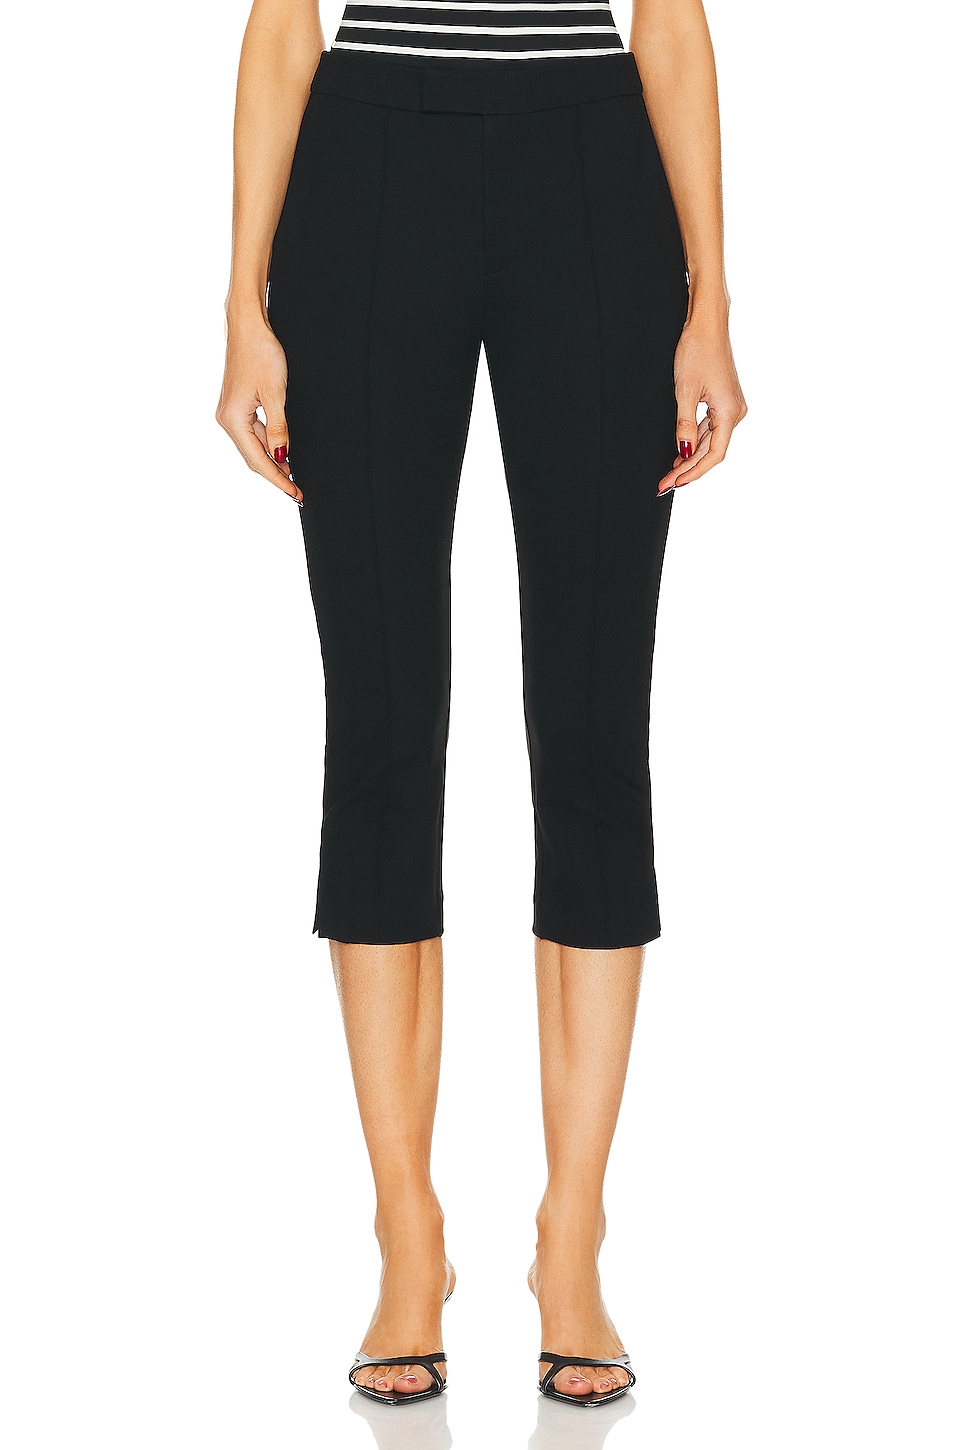 Image 1 of NICHOLAS Imogen Pedal Pusher Pant in Solid Black